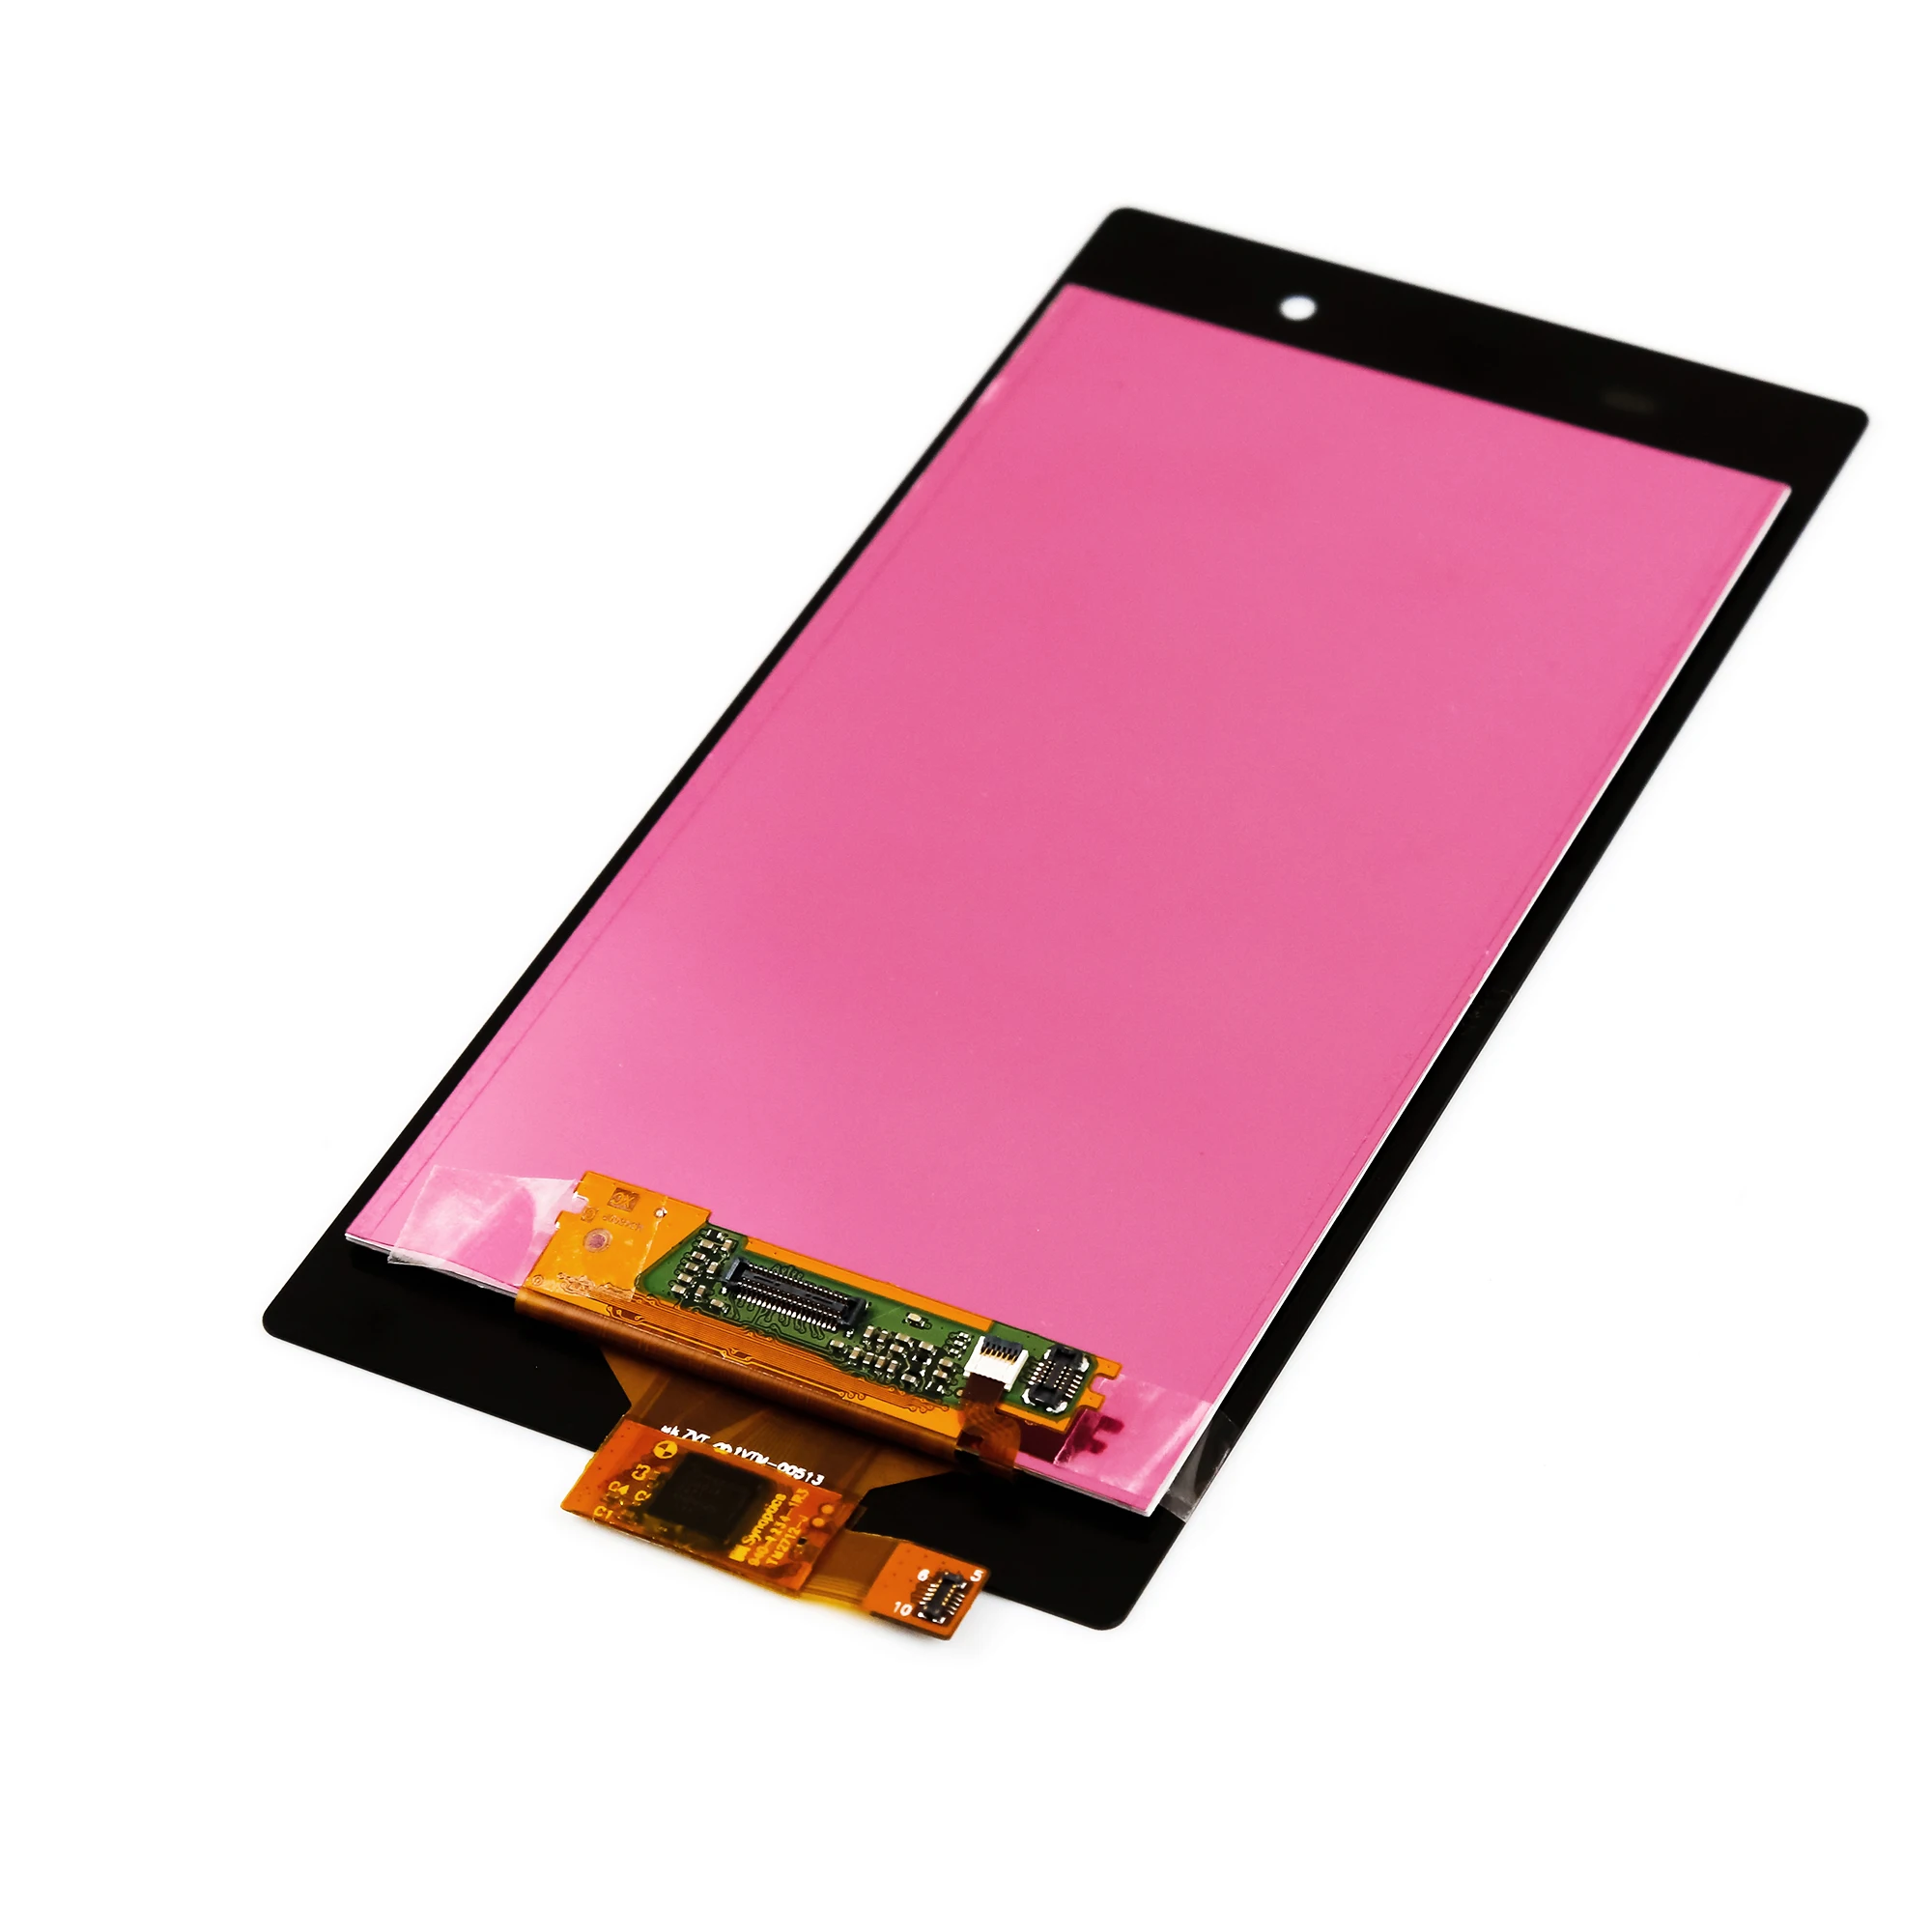 China Cheap Price Display Touch Screen Digitizer Assembly For Sony Xperia Z1 L39h - Buy Lcd Touch Screen Digitizer For Sony Xperia Z1 L39h,For Sony Xperia Z1 Screen,For Sony